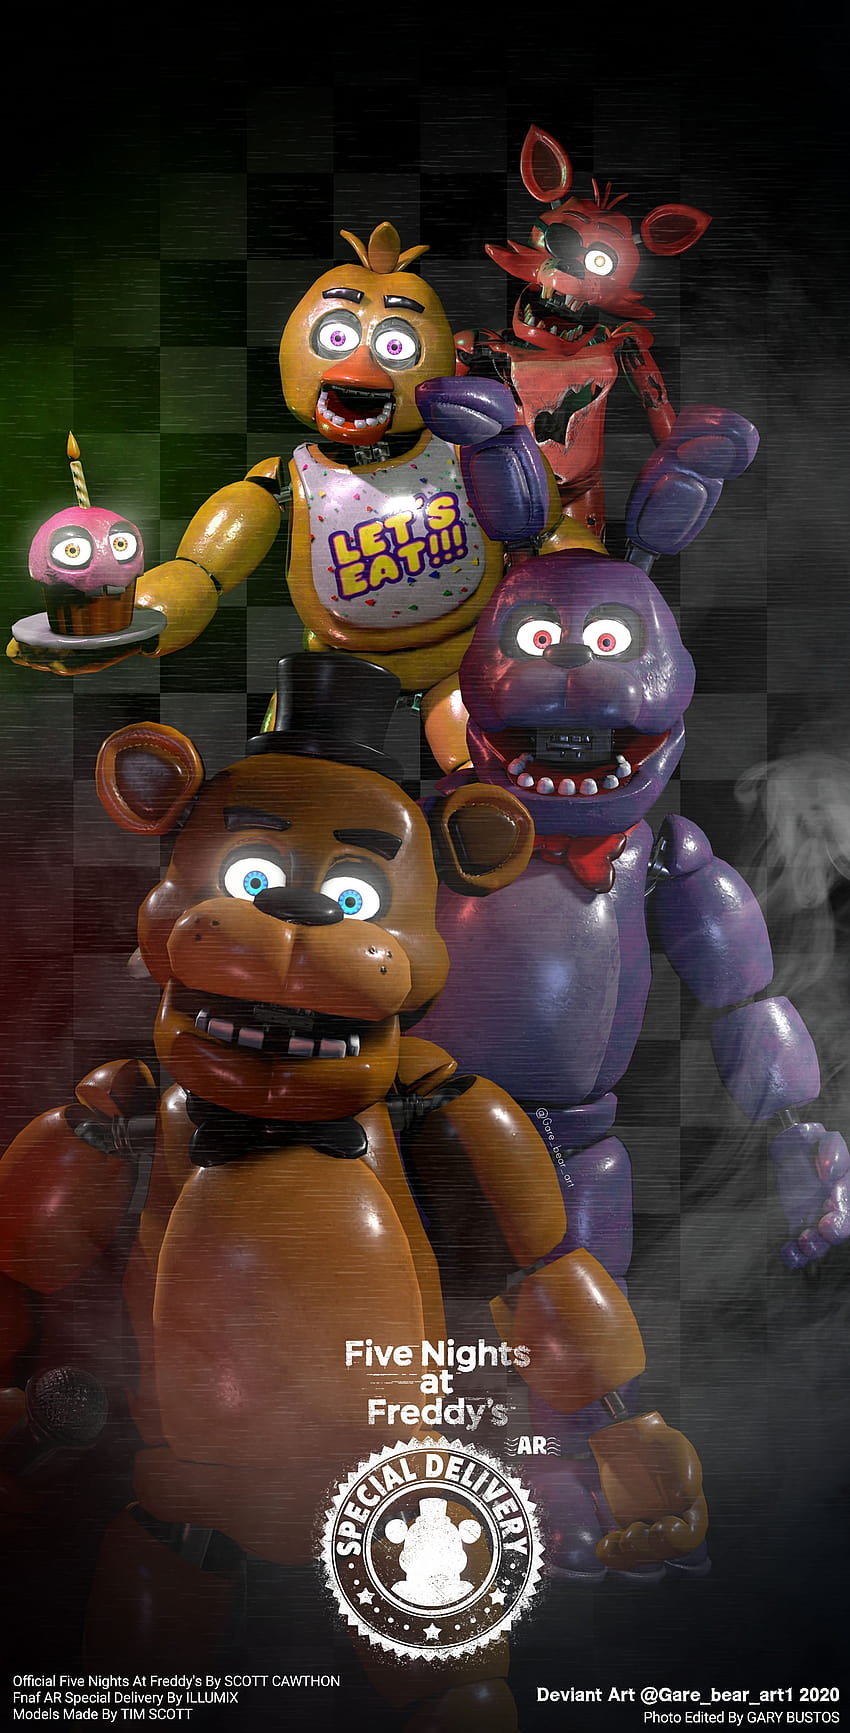 20 Five Nights at Freddy's ideas in 2021, five nights at freddys core HD phone wallpaper